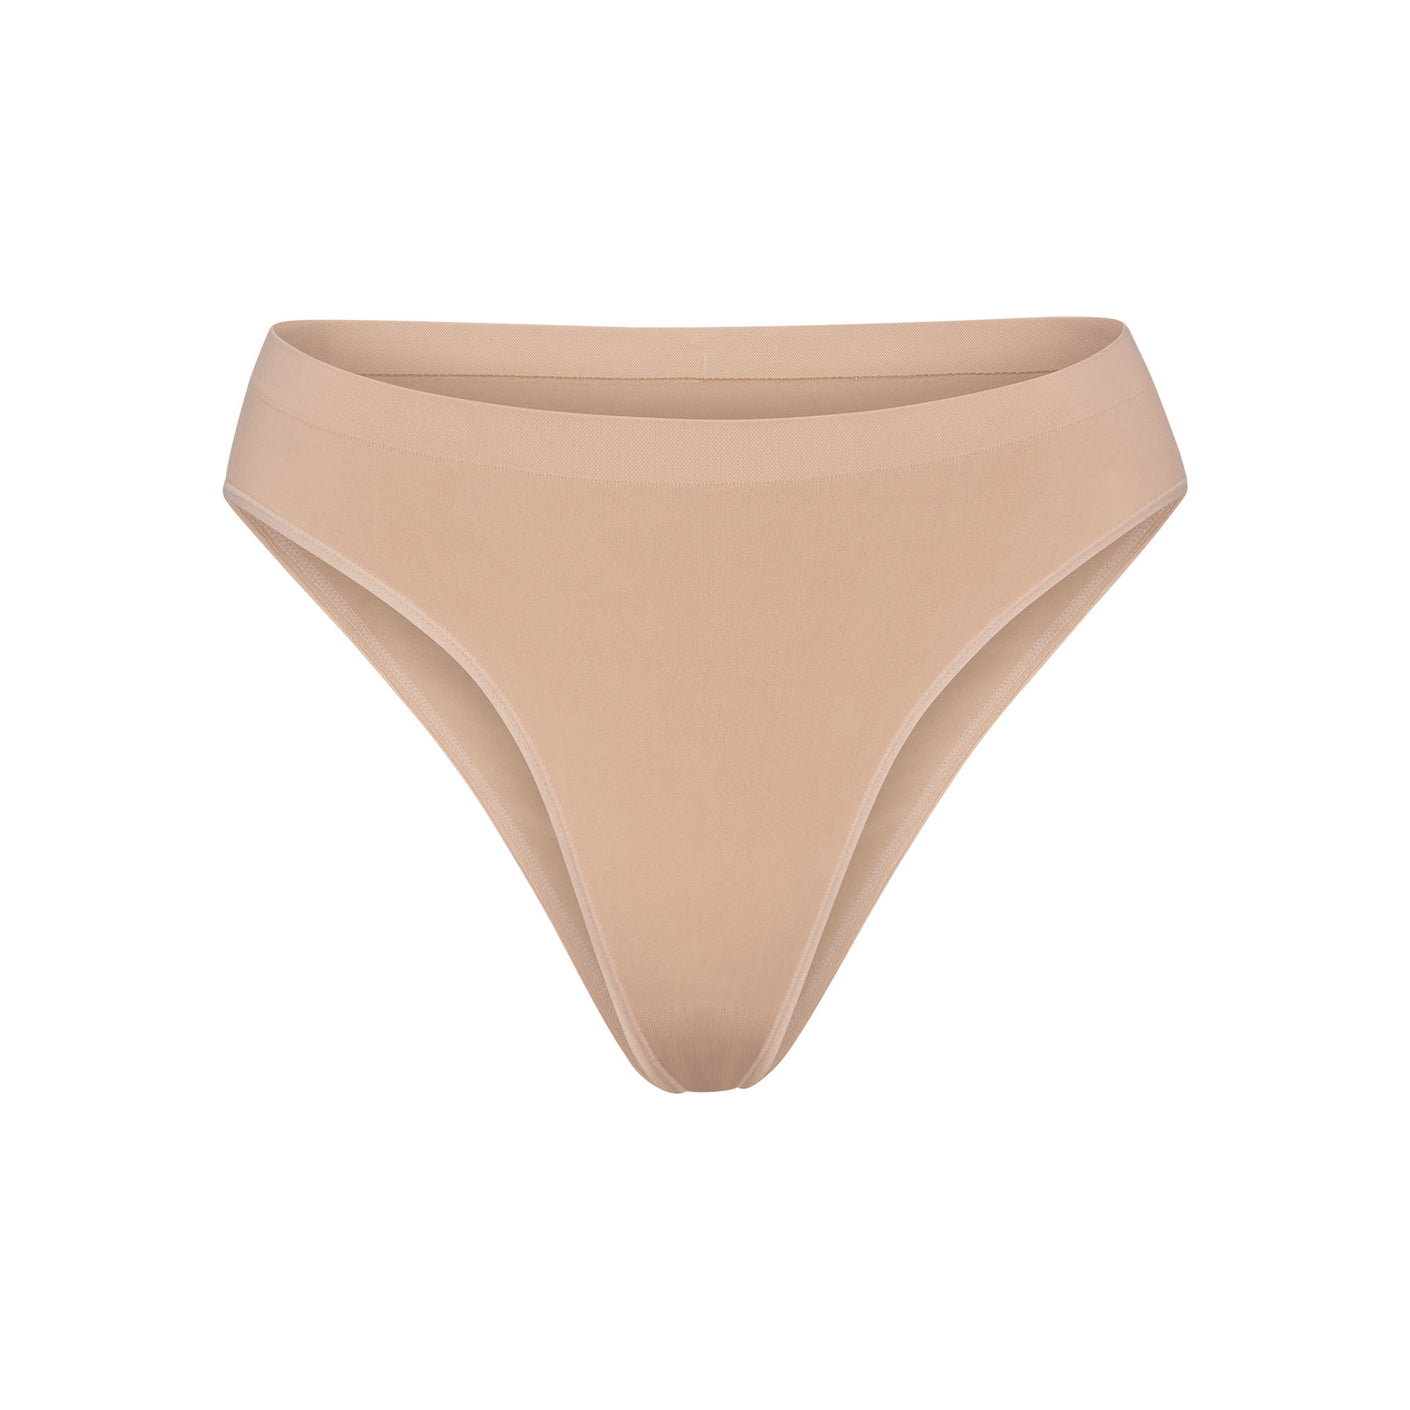 SOFT SMOOTHING SEAMLESS BRIEF